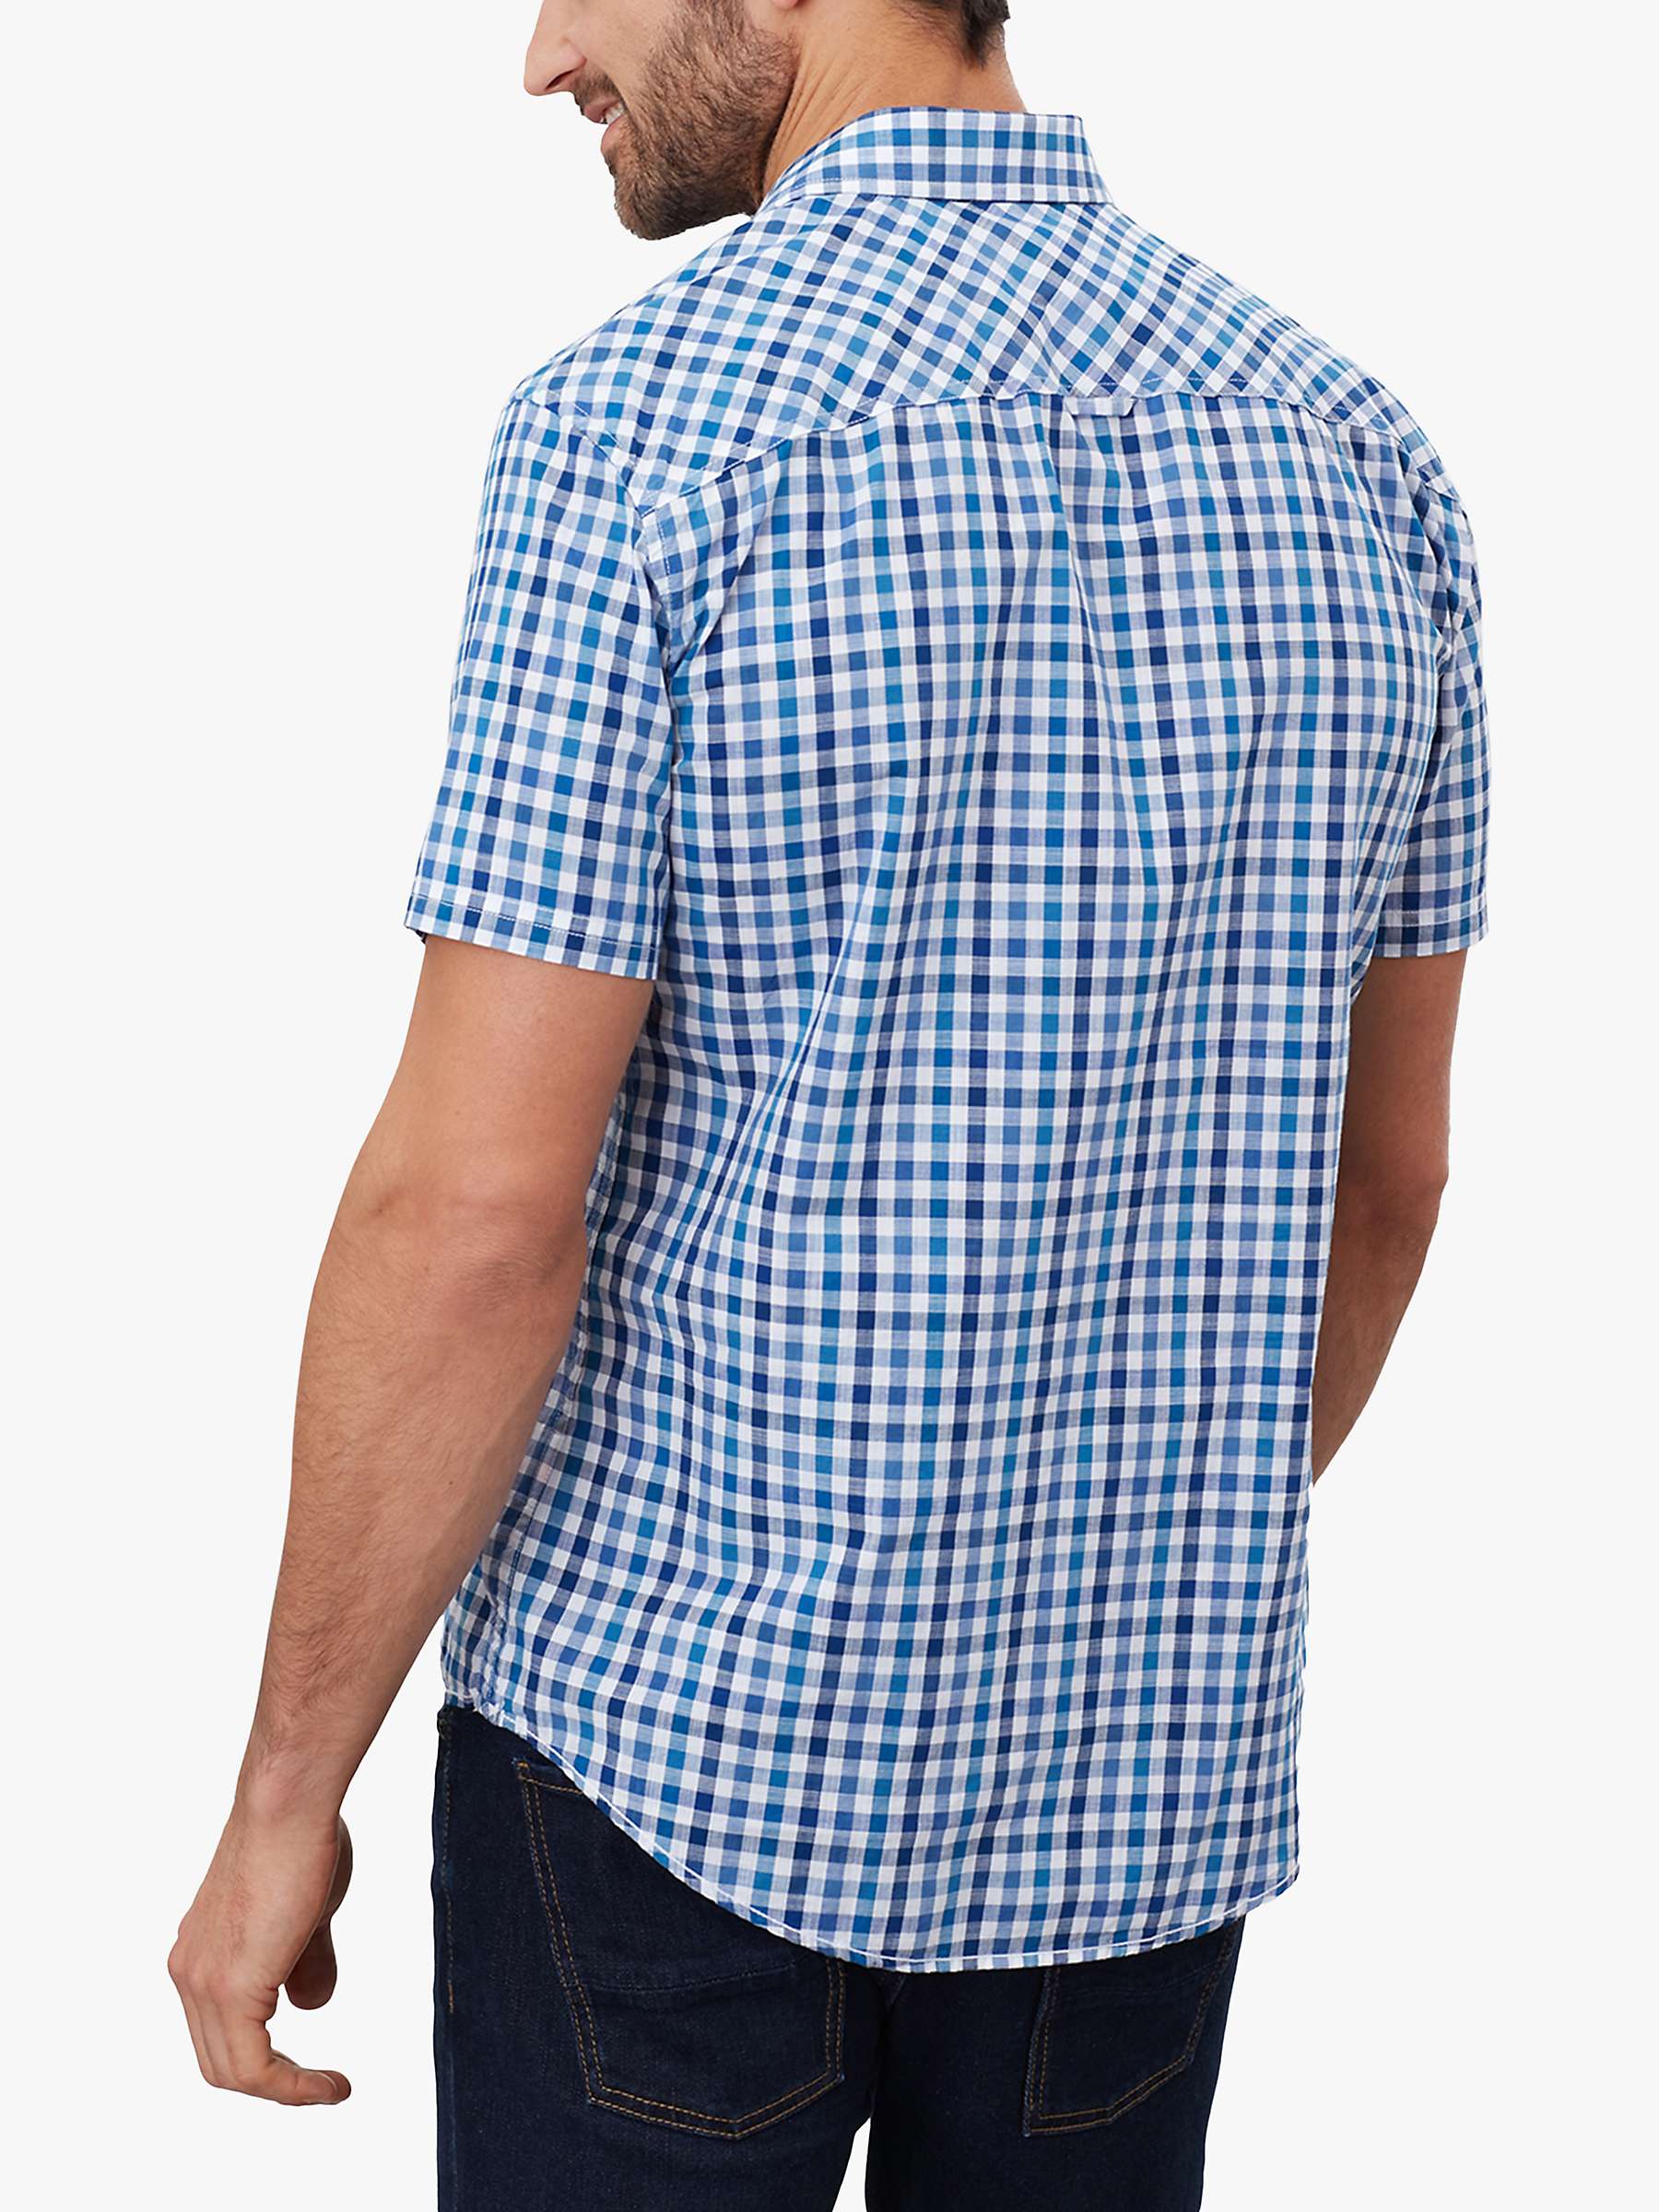 Buy Joules Wilson Check Shirt, Blue Gingham Online at johnlewis.com